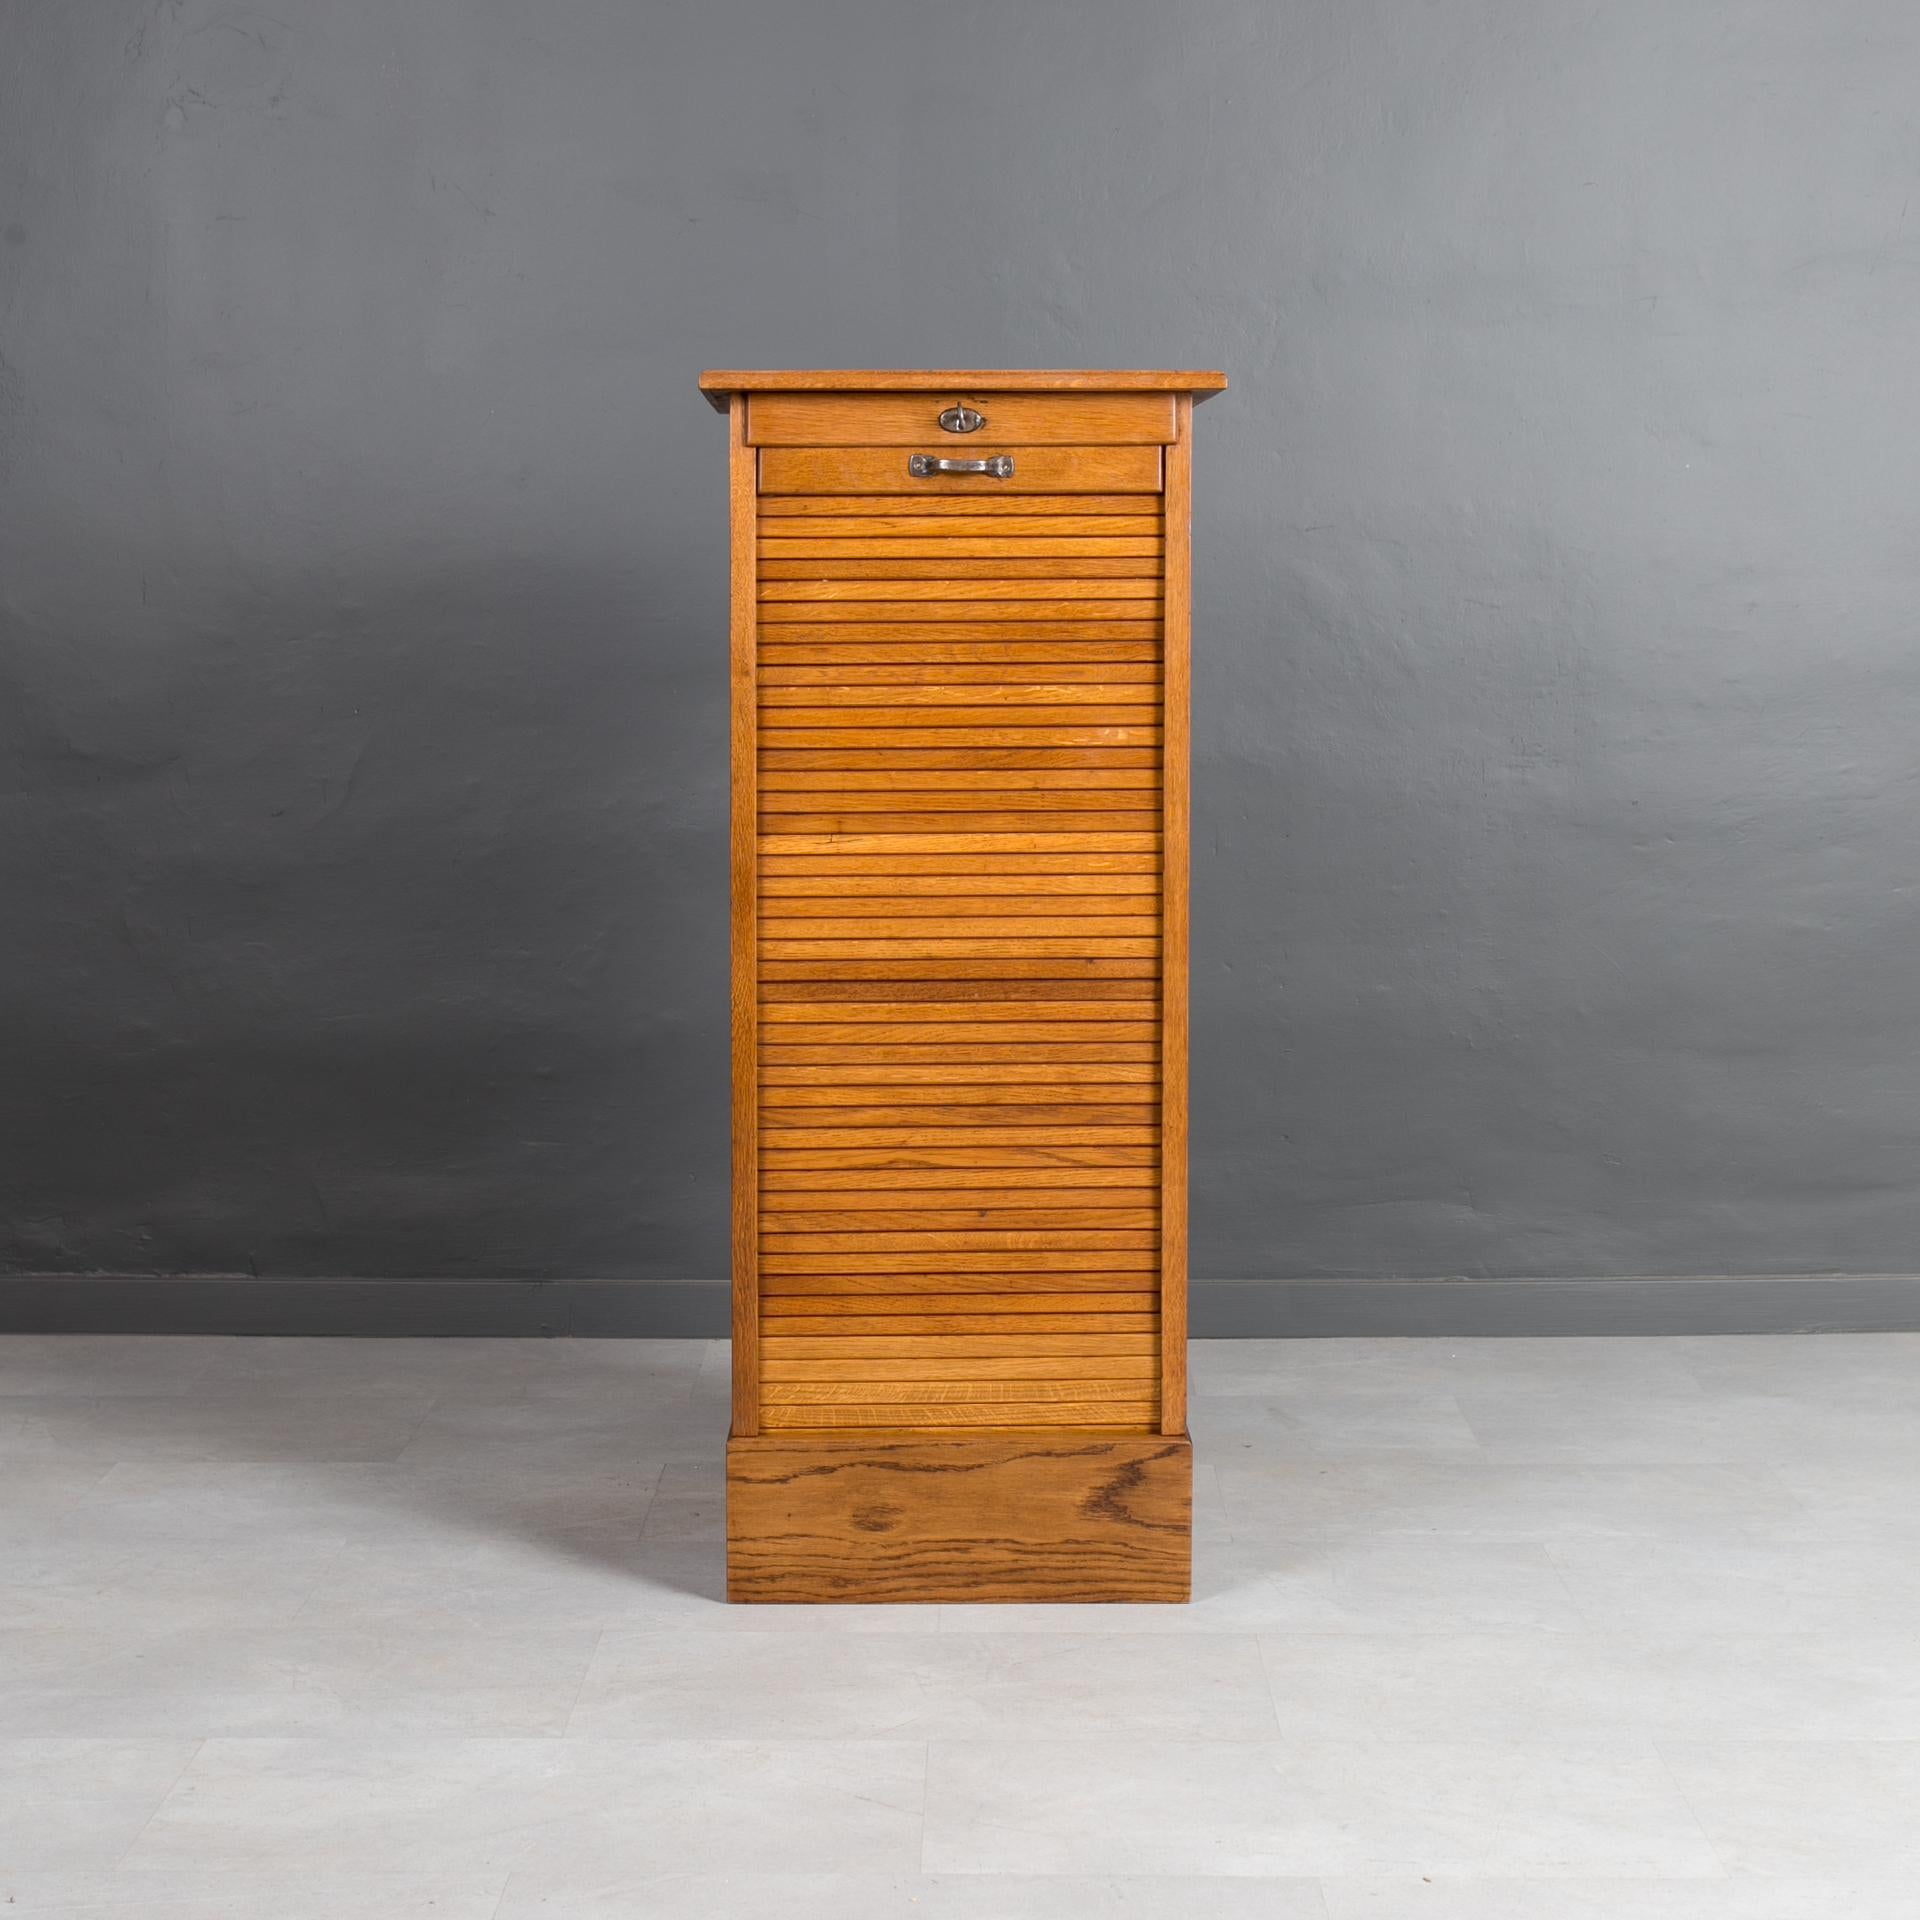 This file cabinet was made around 1920s. It is made of solid oak and was carefully renovated. The surface was cleaned and refinished with wood oil that not only preserves and nourishes the wood but also provides very natural finishing touch. It